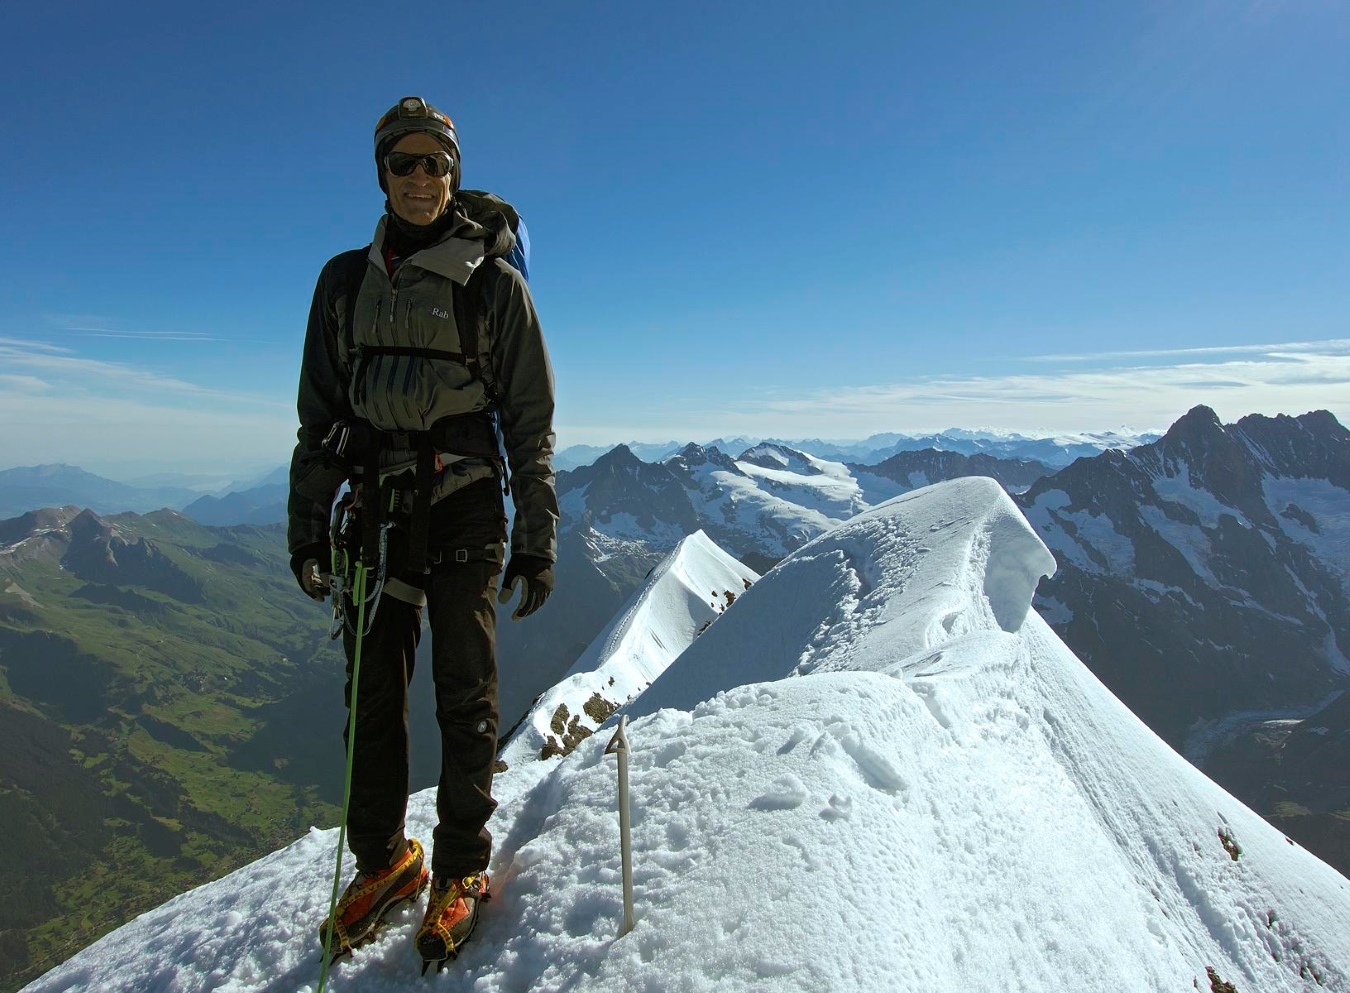 A climber on the Eiger summit in perfect conditions.